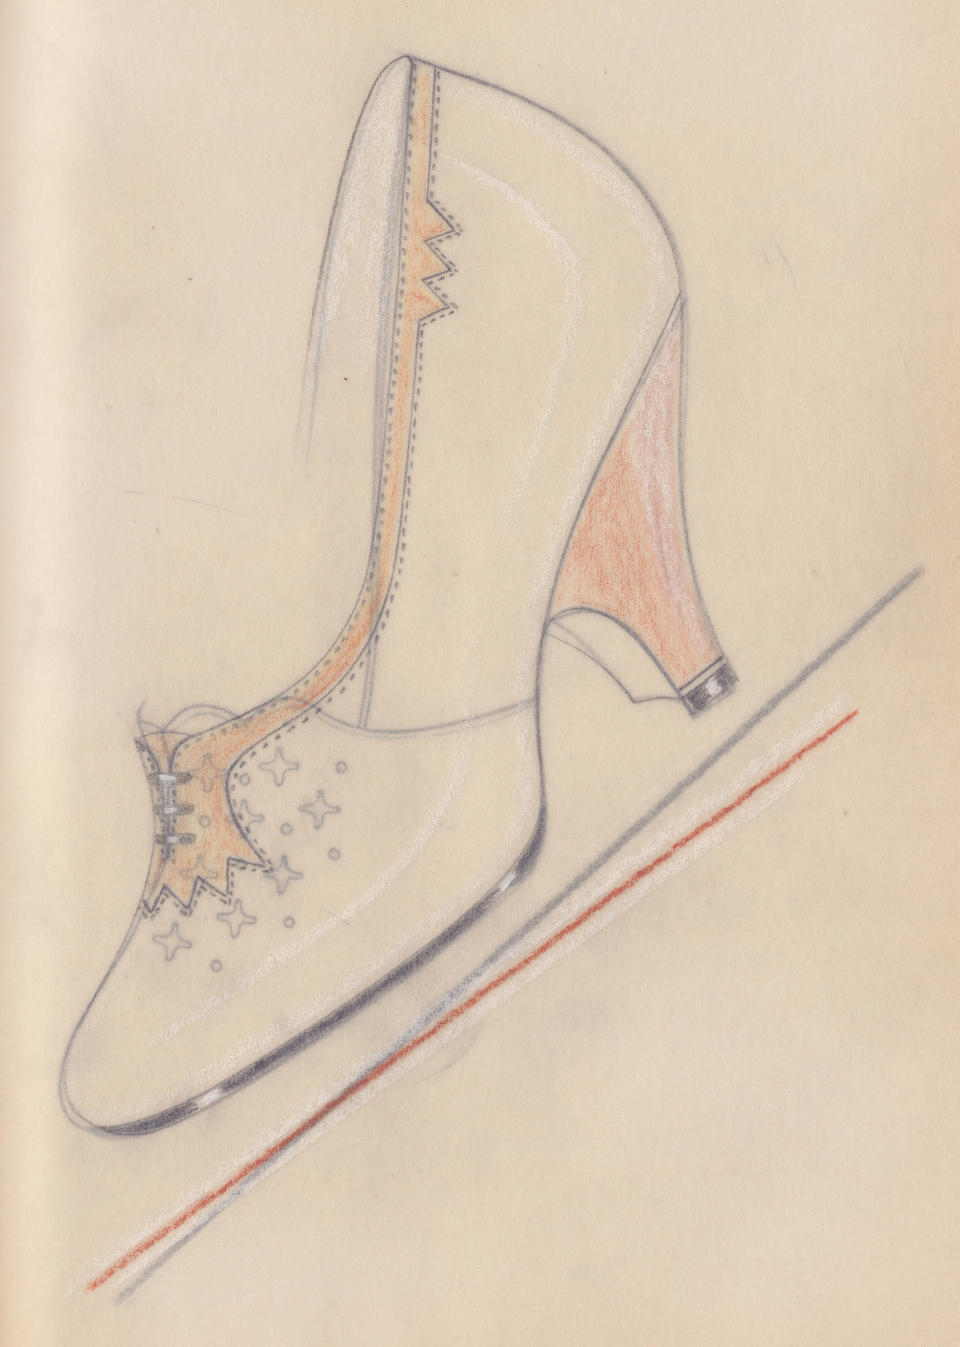 SHOE AND JEWELLERY DESIGNS Album containing approximately 165 designs for ladies' court shoes and high heels with myriad varying decorations, [probably Germany, 1950s] (2)